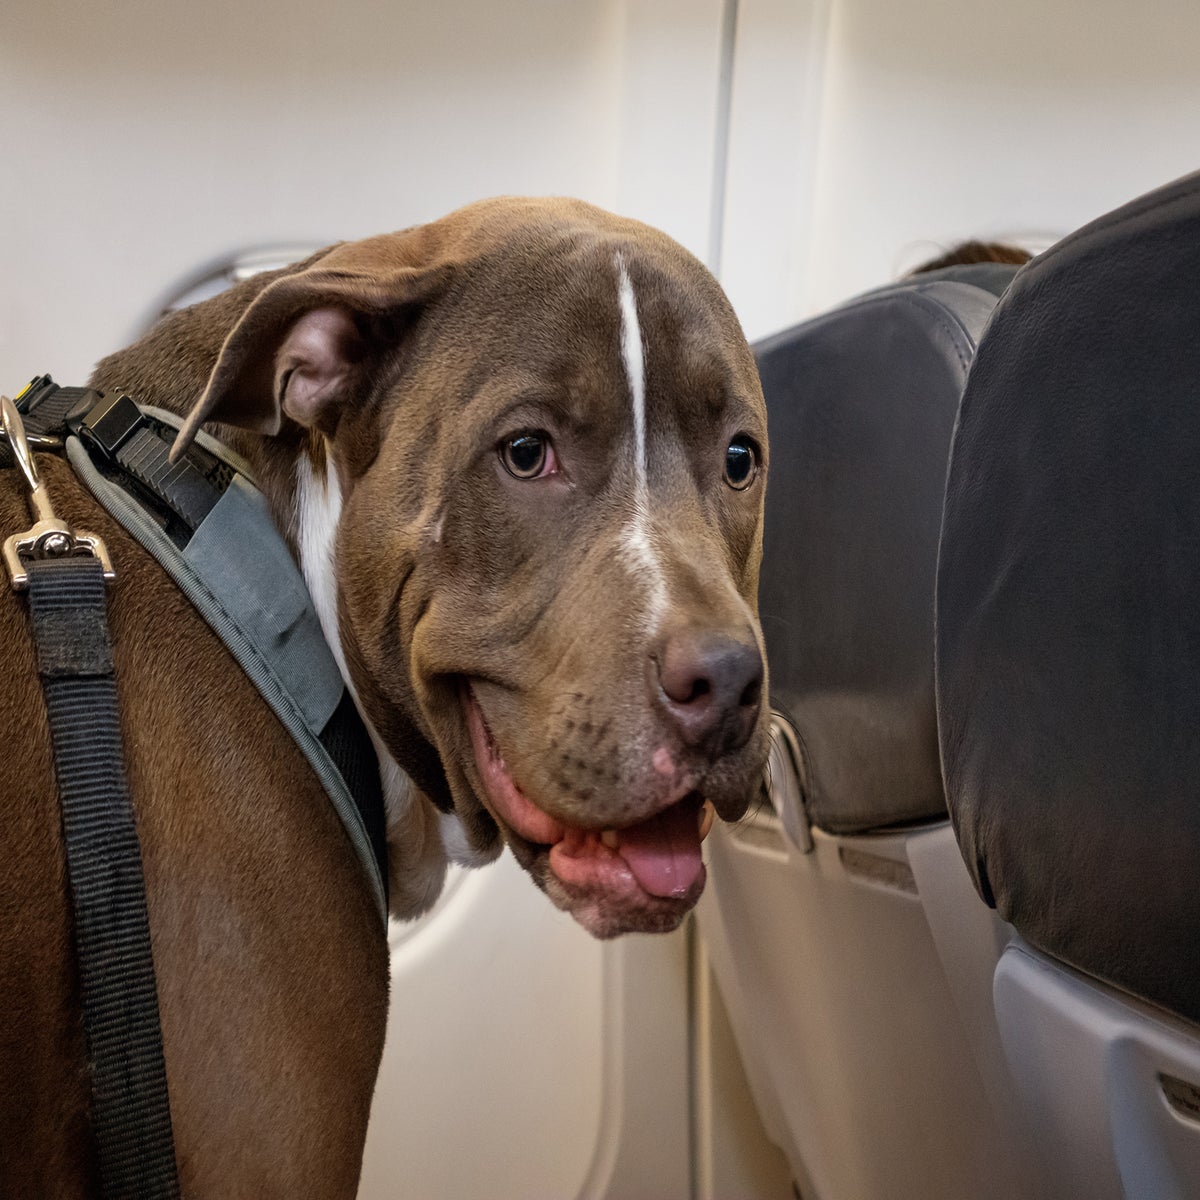 Passenger Kicked Off Flight for Refusing to Put Dog in Case